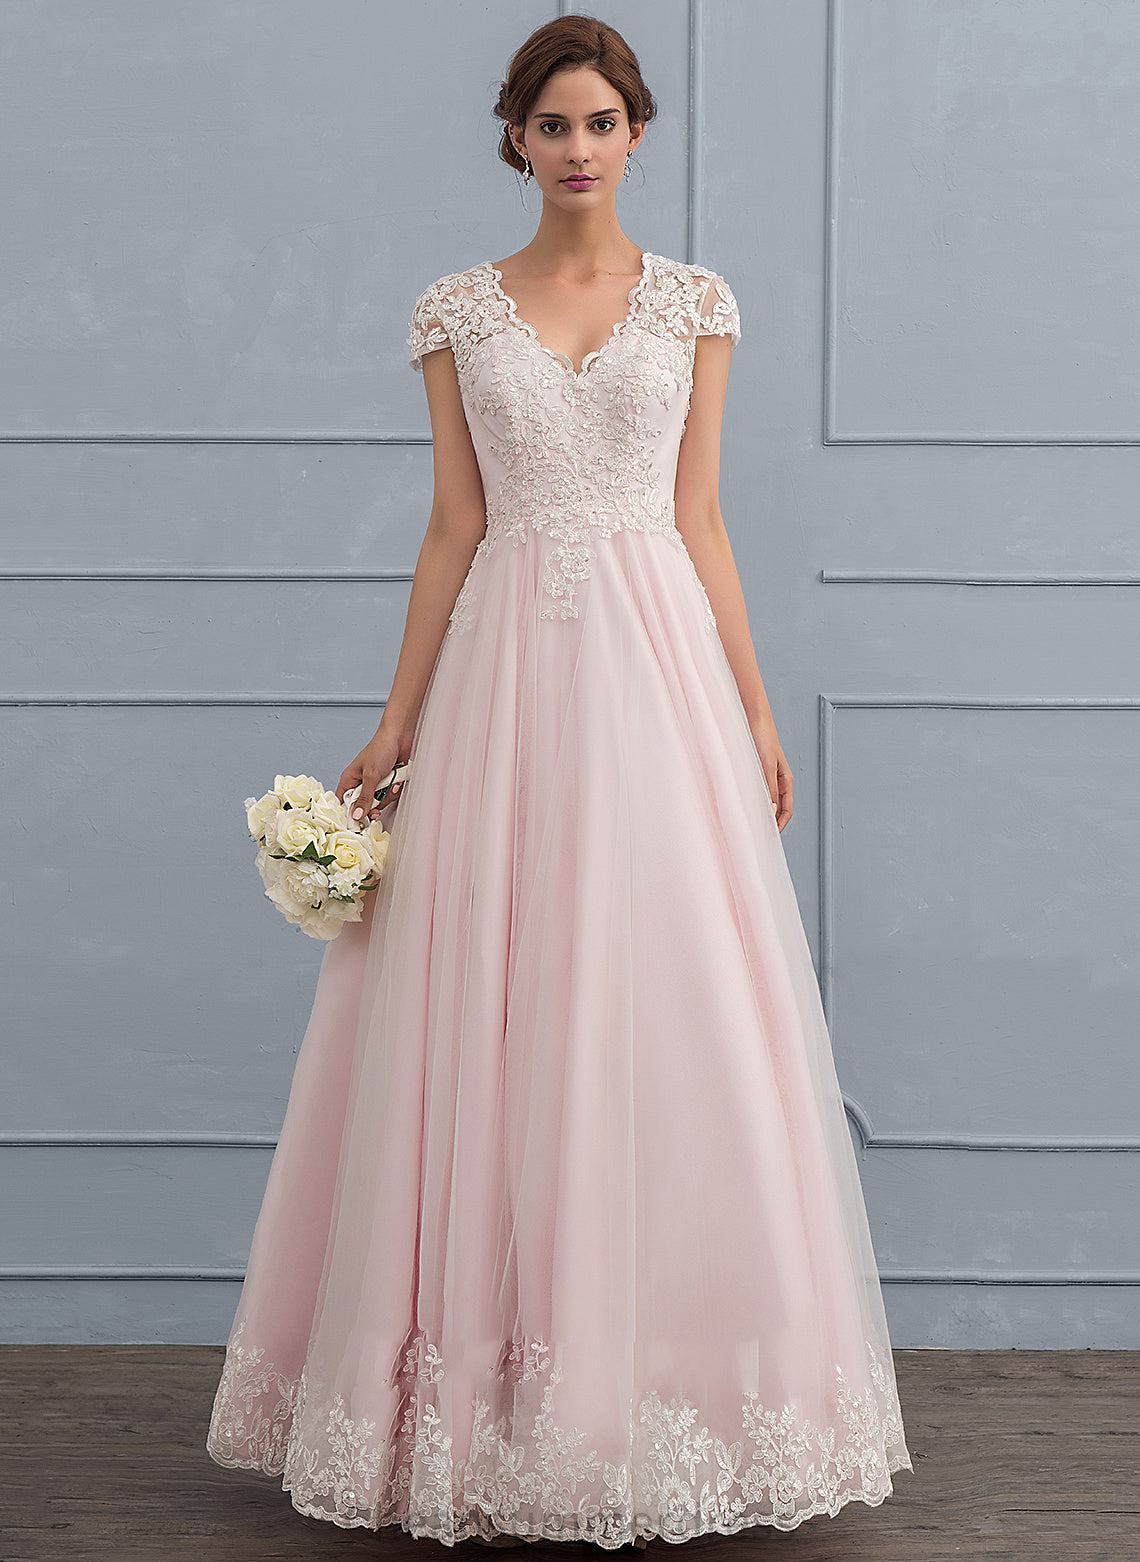 Dress Raven Sequins Wedding Tulle Wedding Dresses Floor-Length Beading With V-neck Ball-Gown/Princess